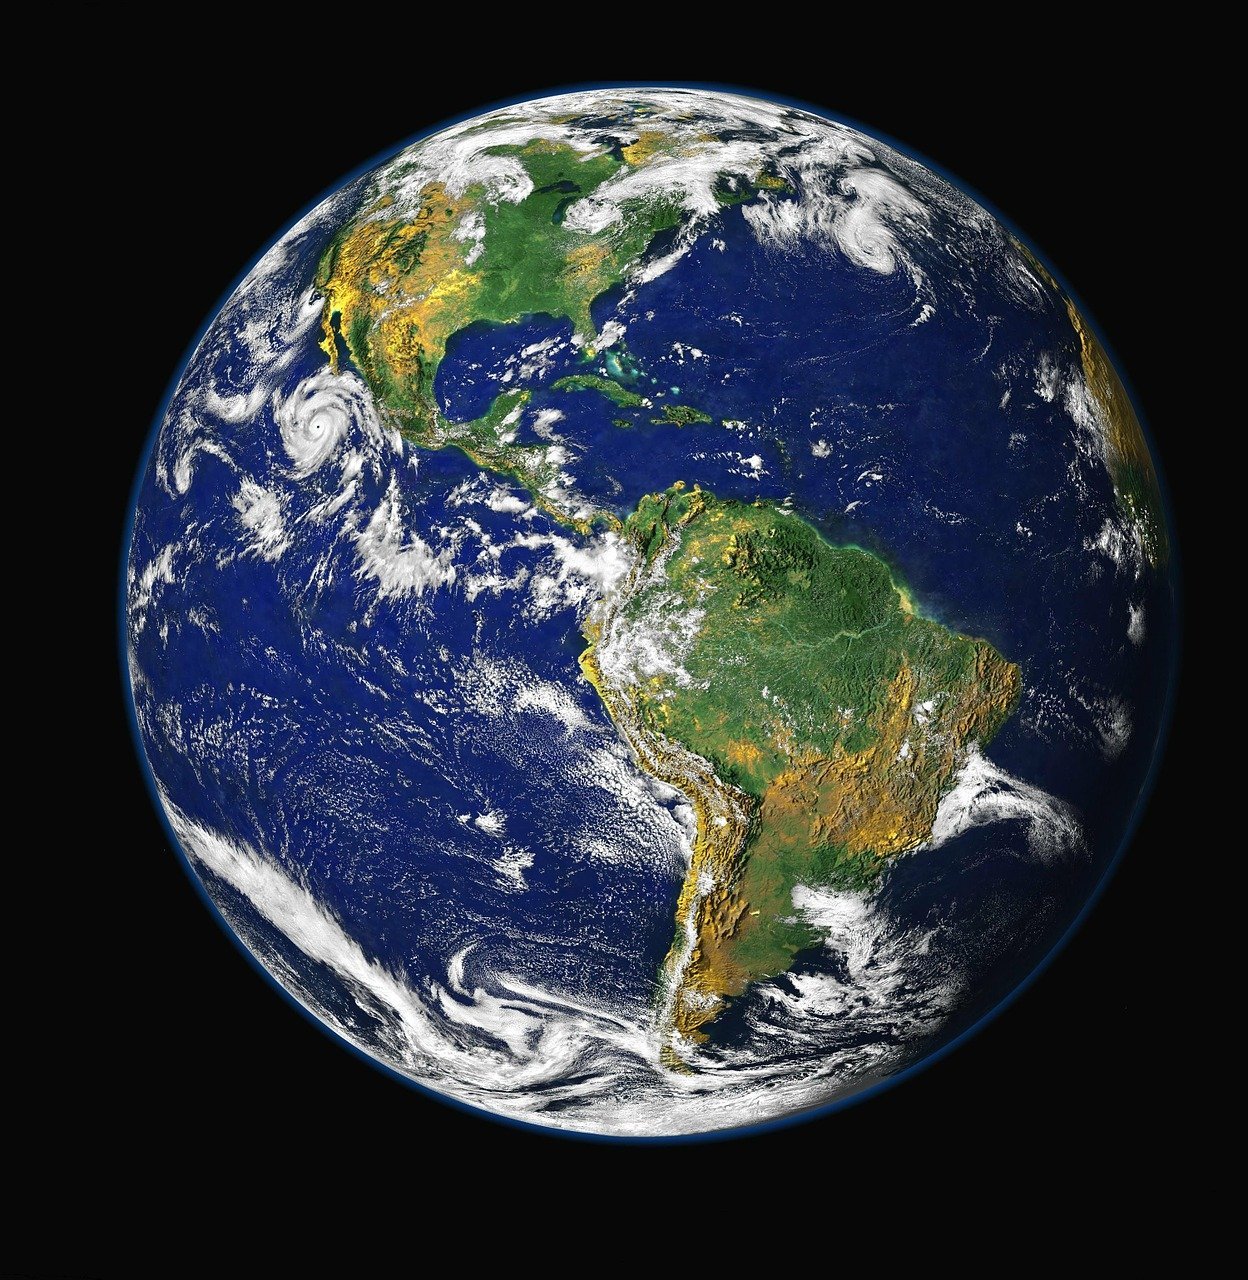 A close-up image of the planet Earth | Photo: Pixabay/WikiImages